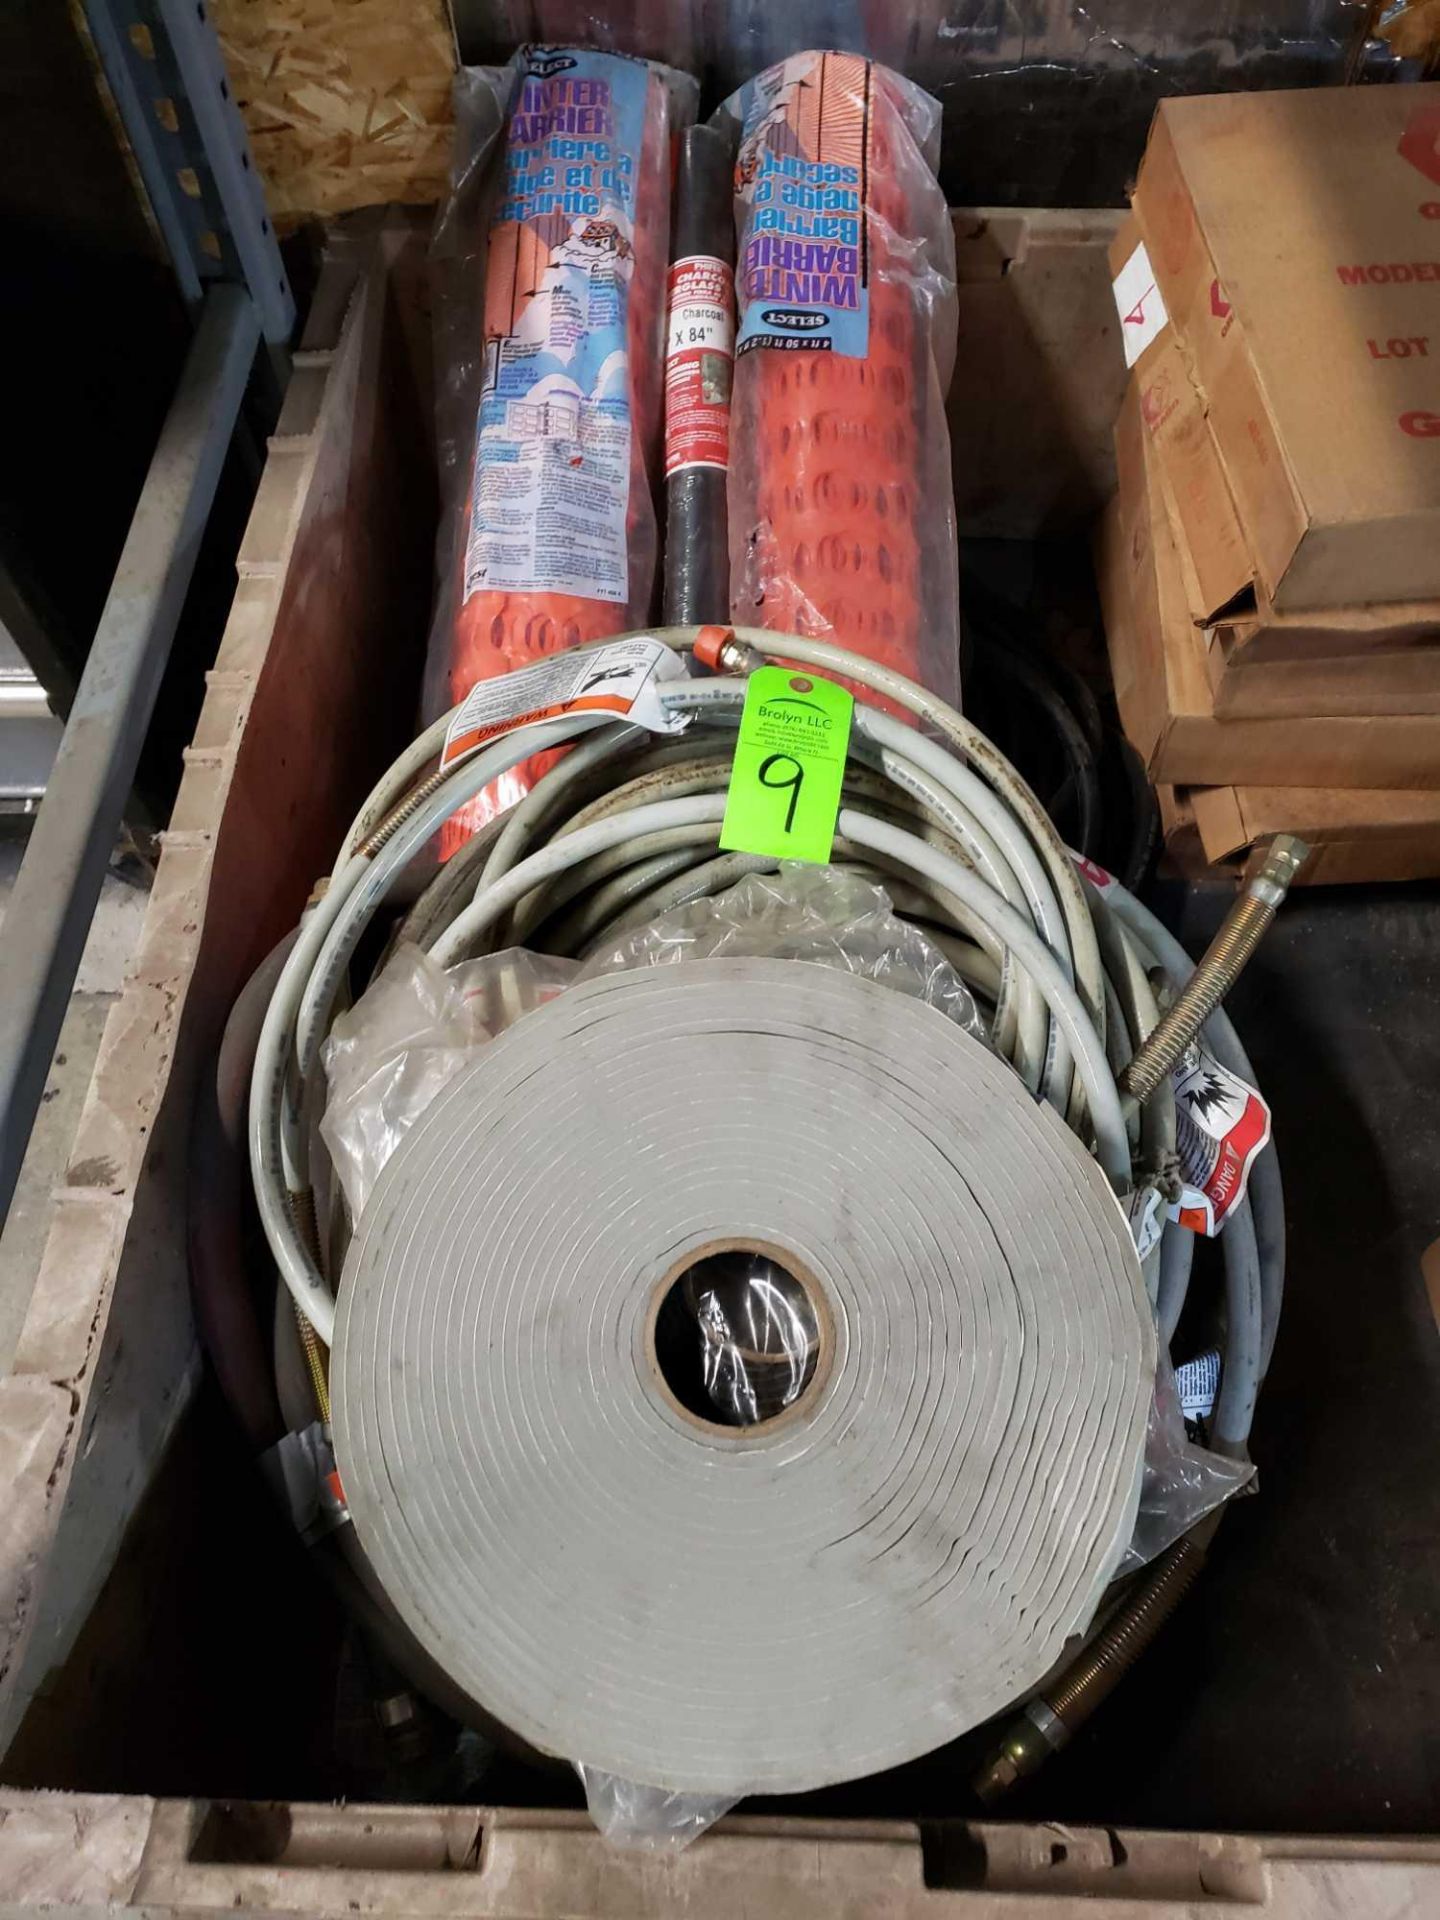 Assorted lot including snow fence, tape, and assorted hoses